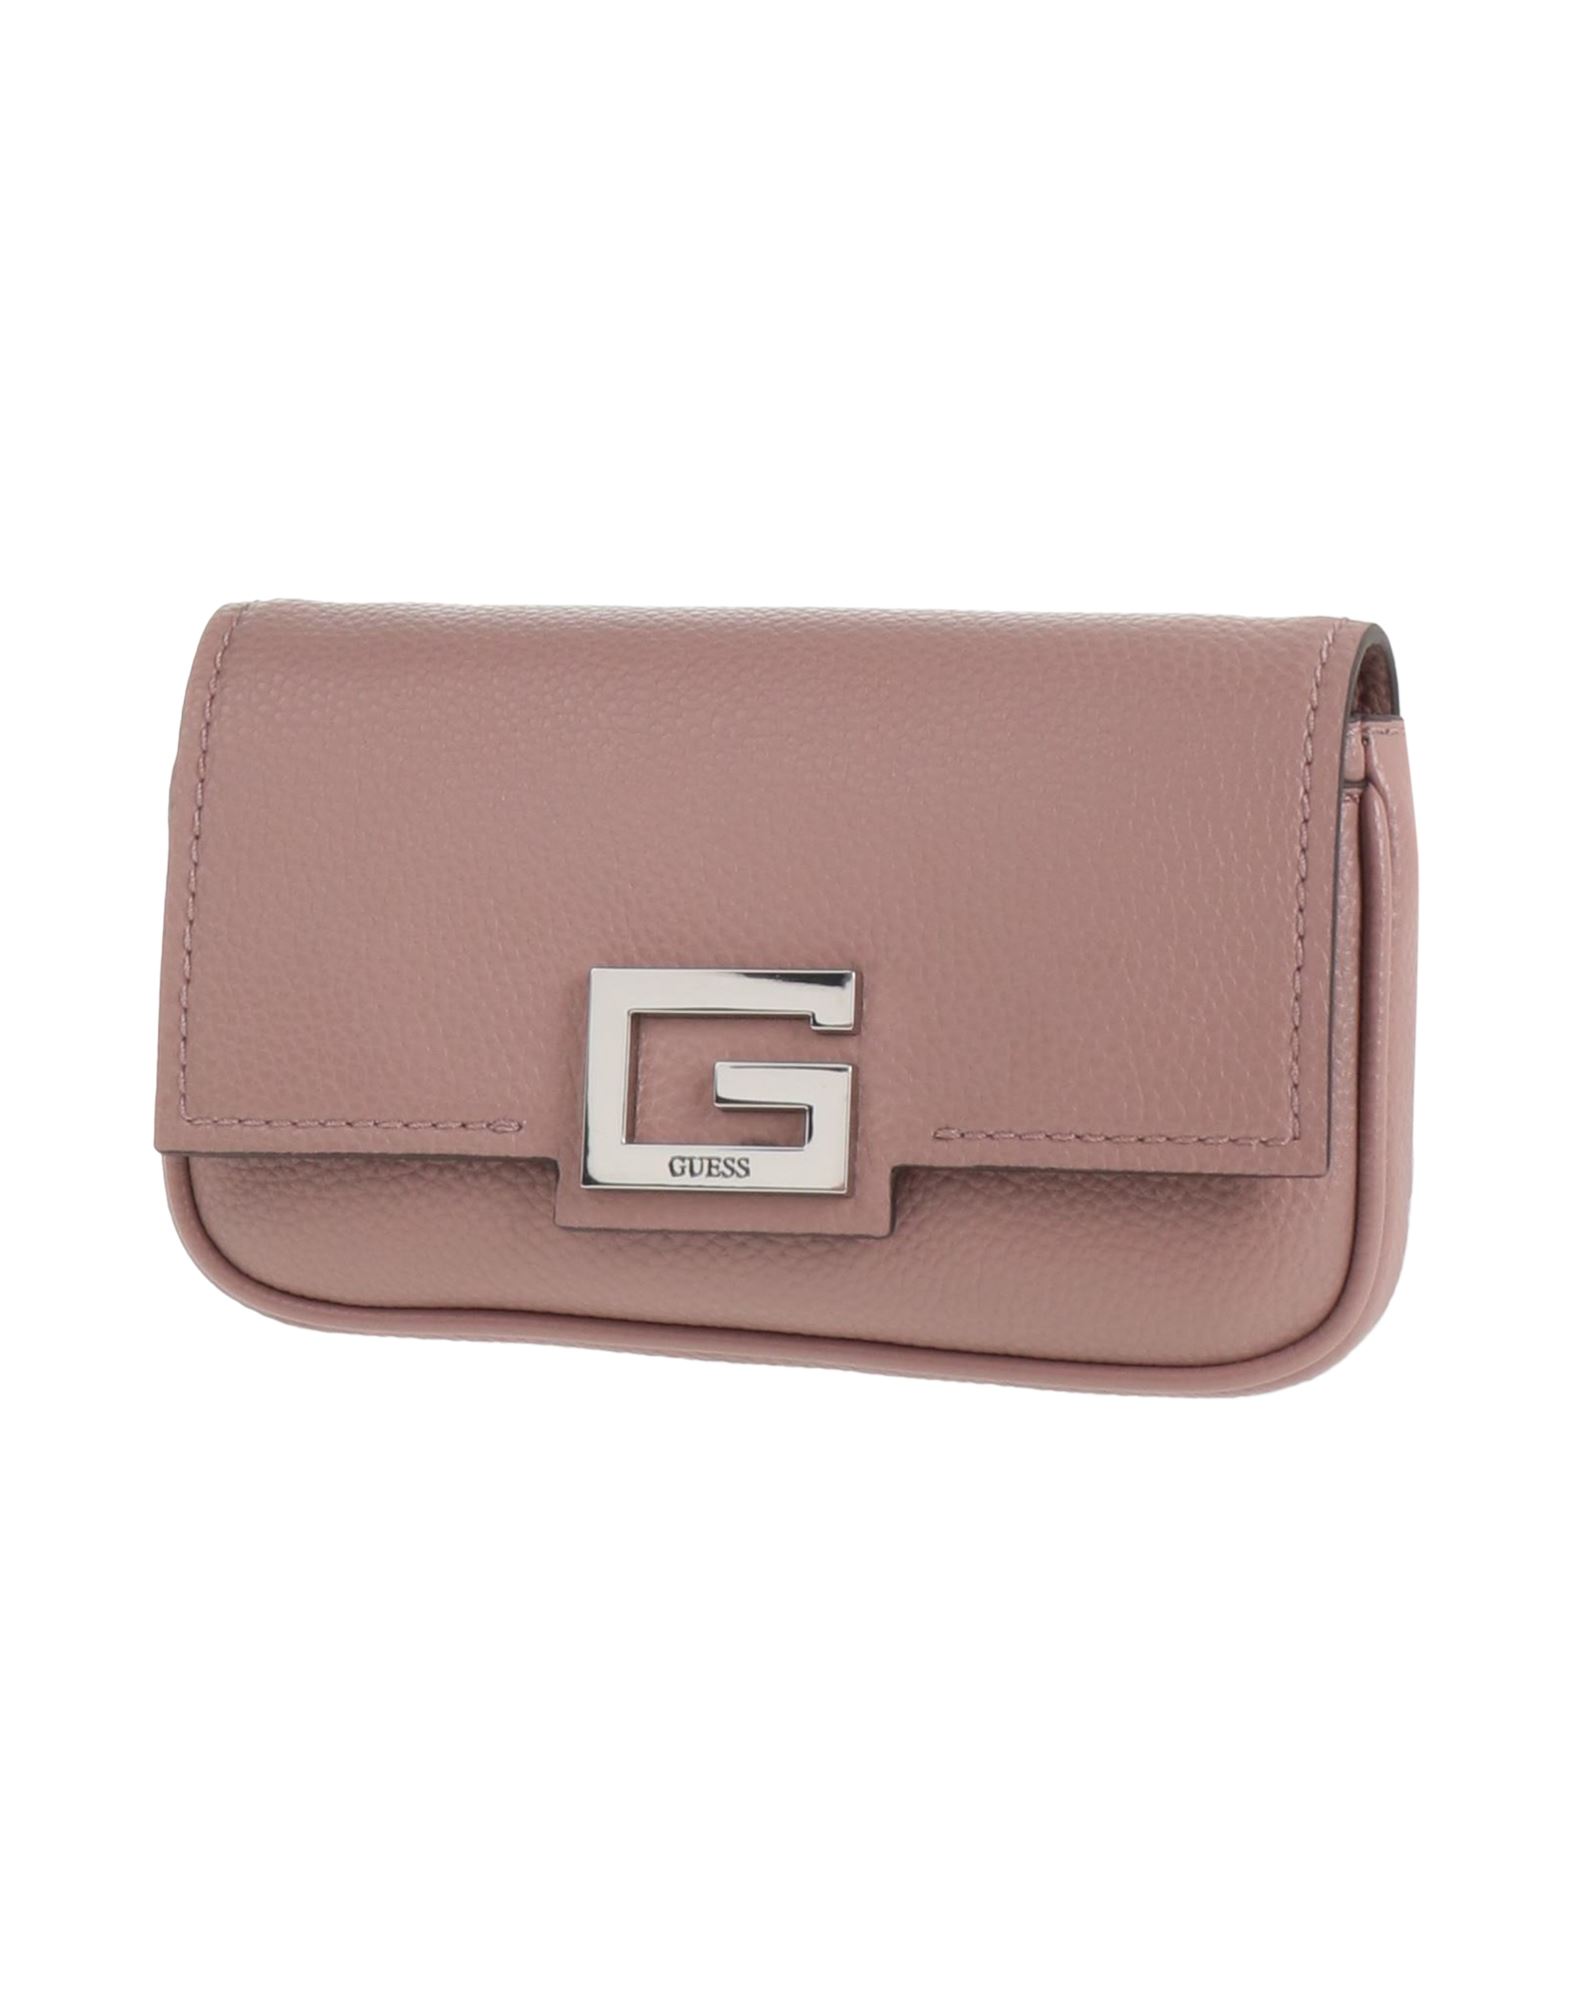 Guess Bum Bags In Pastel Pink